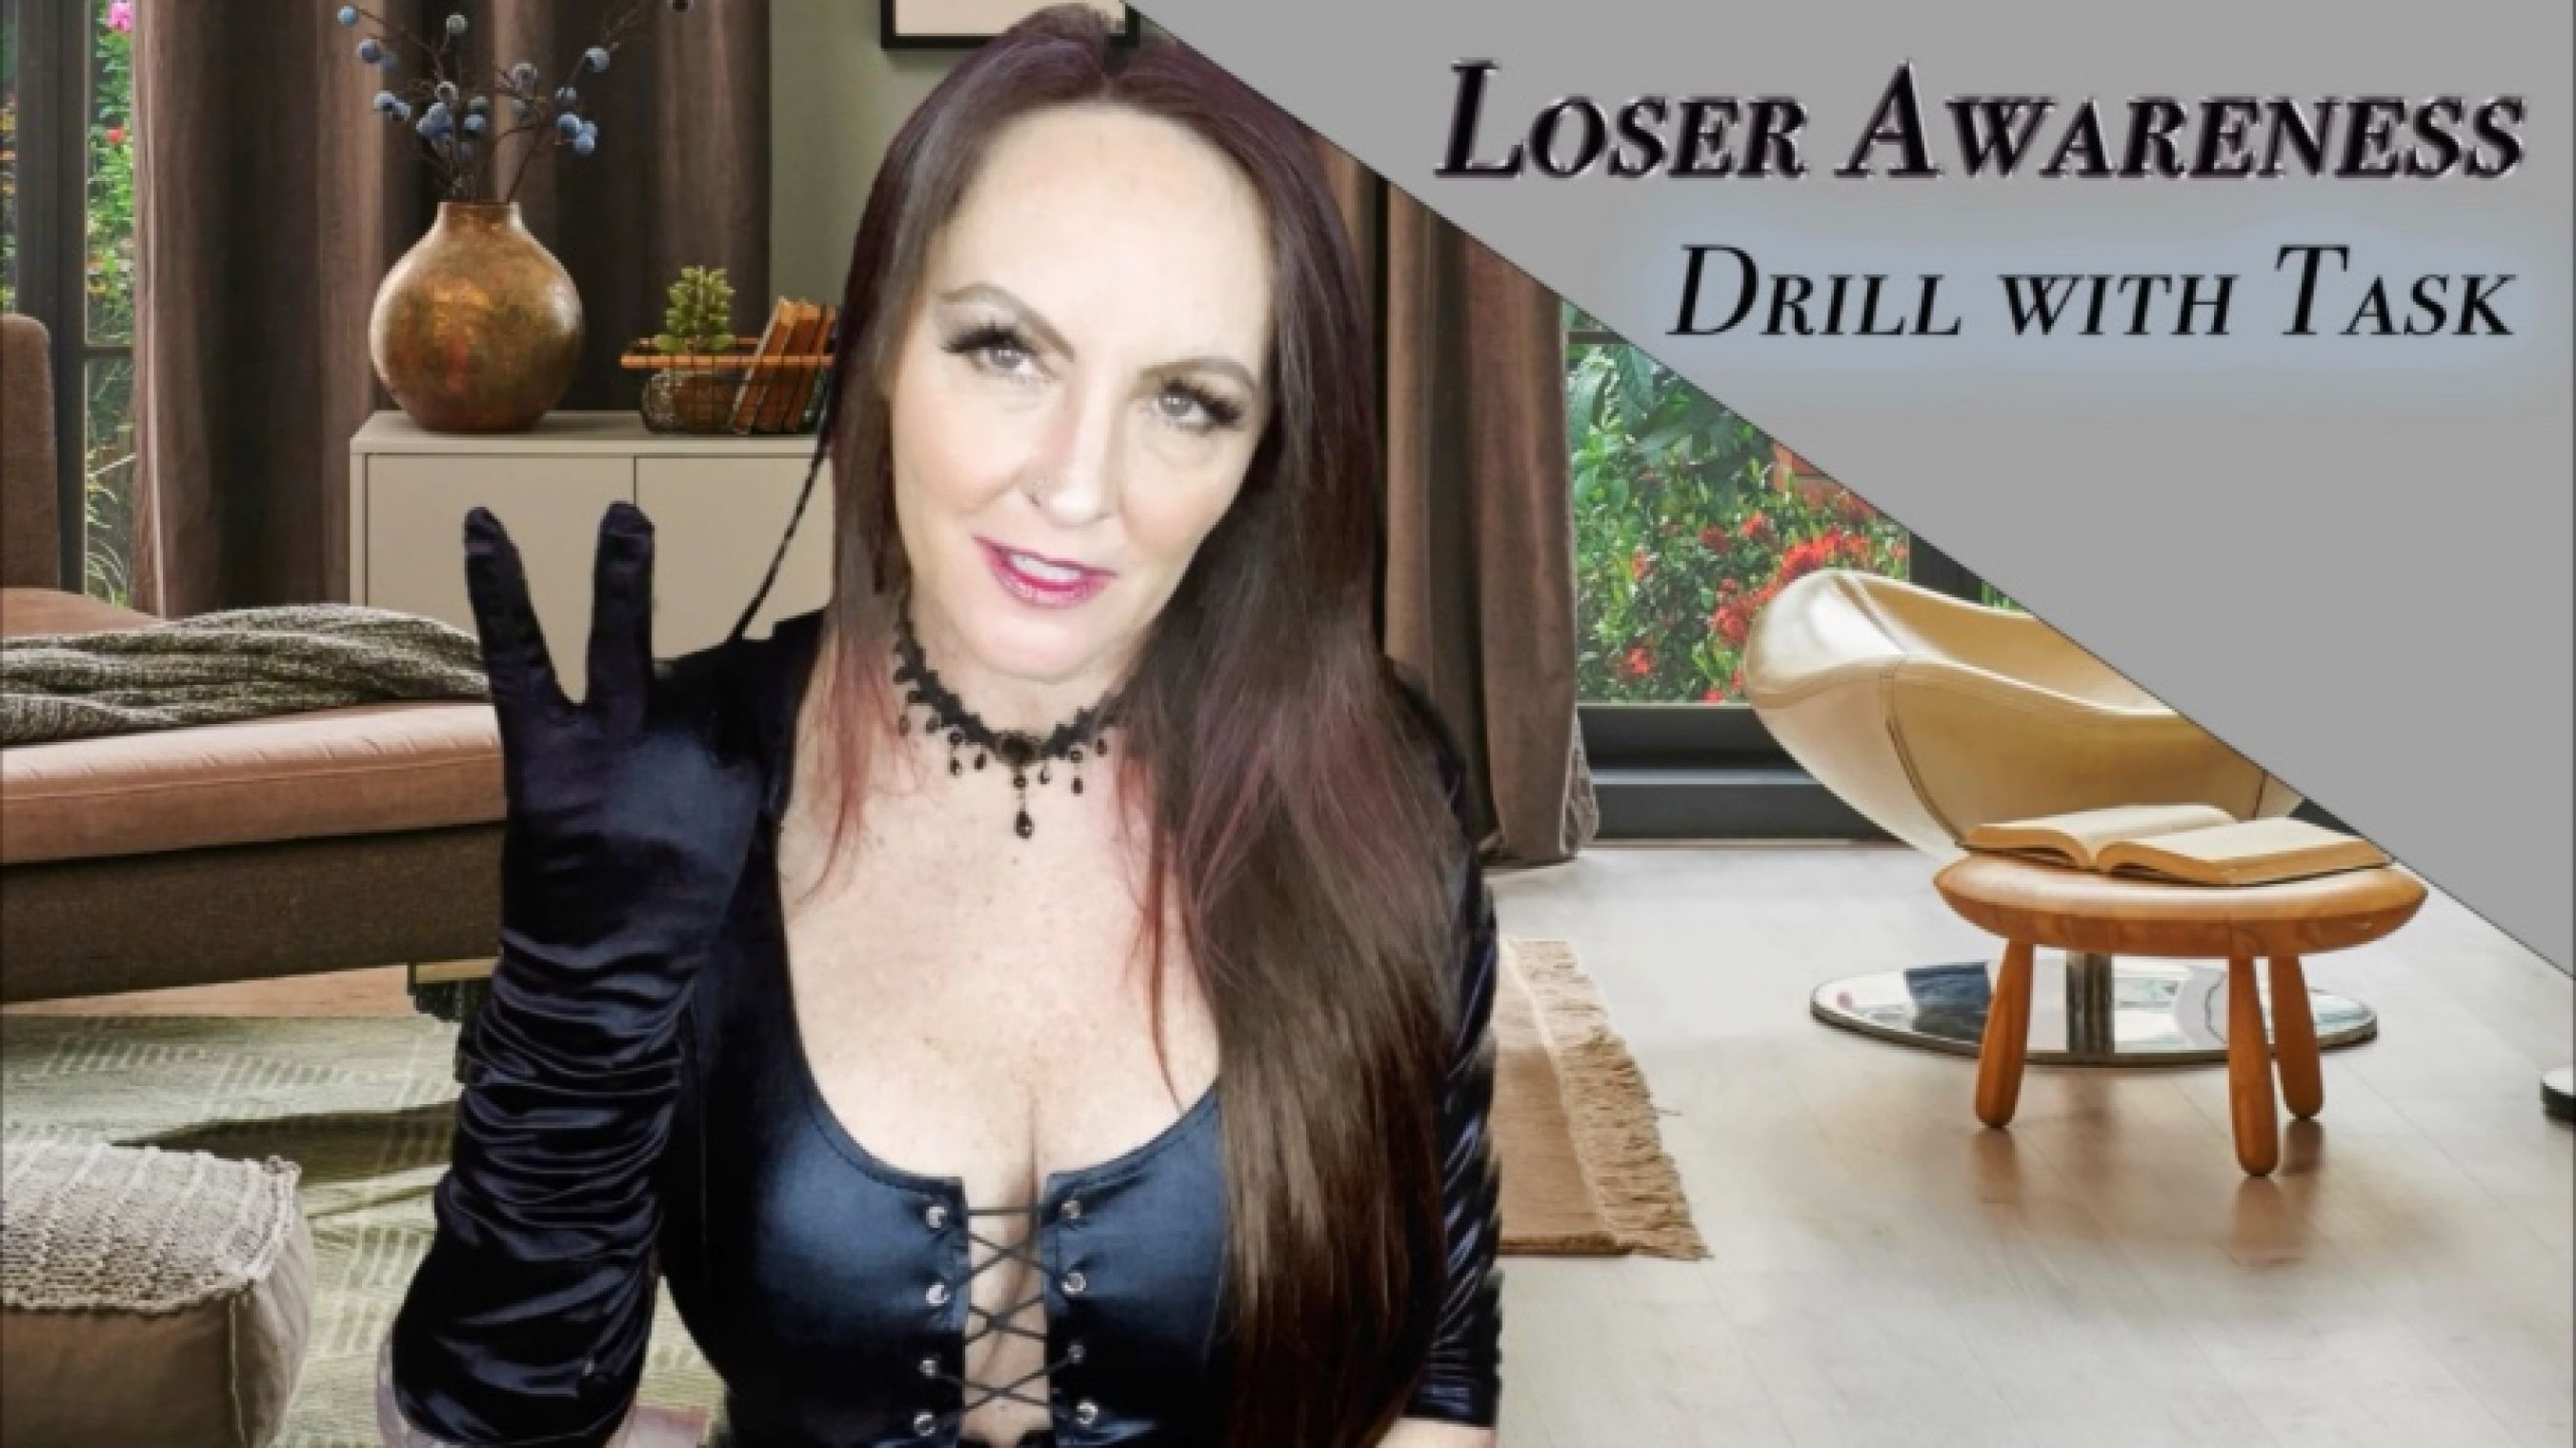 Loser Awareness Drill with Task